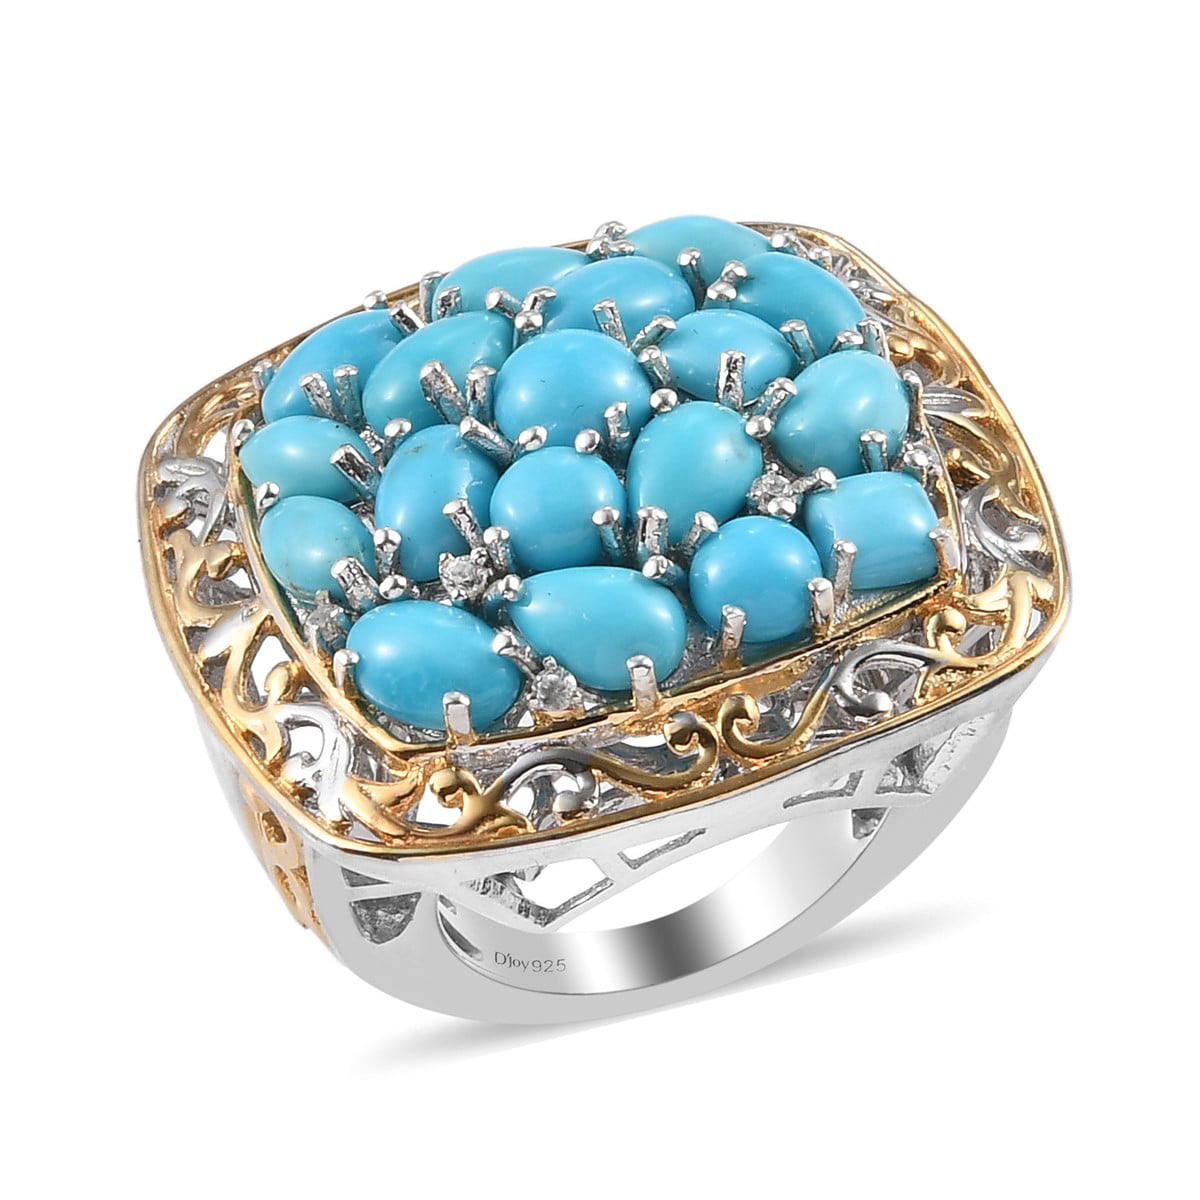 Women Jewelry 925 Silver Nest Turquoise CZ Ring Wedding Engagement Party Sz6-10 